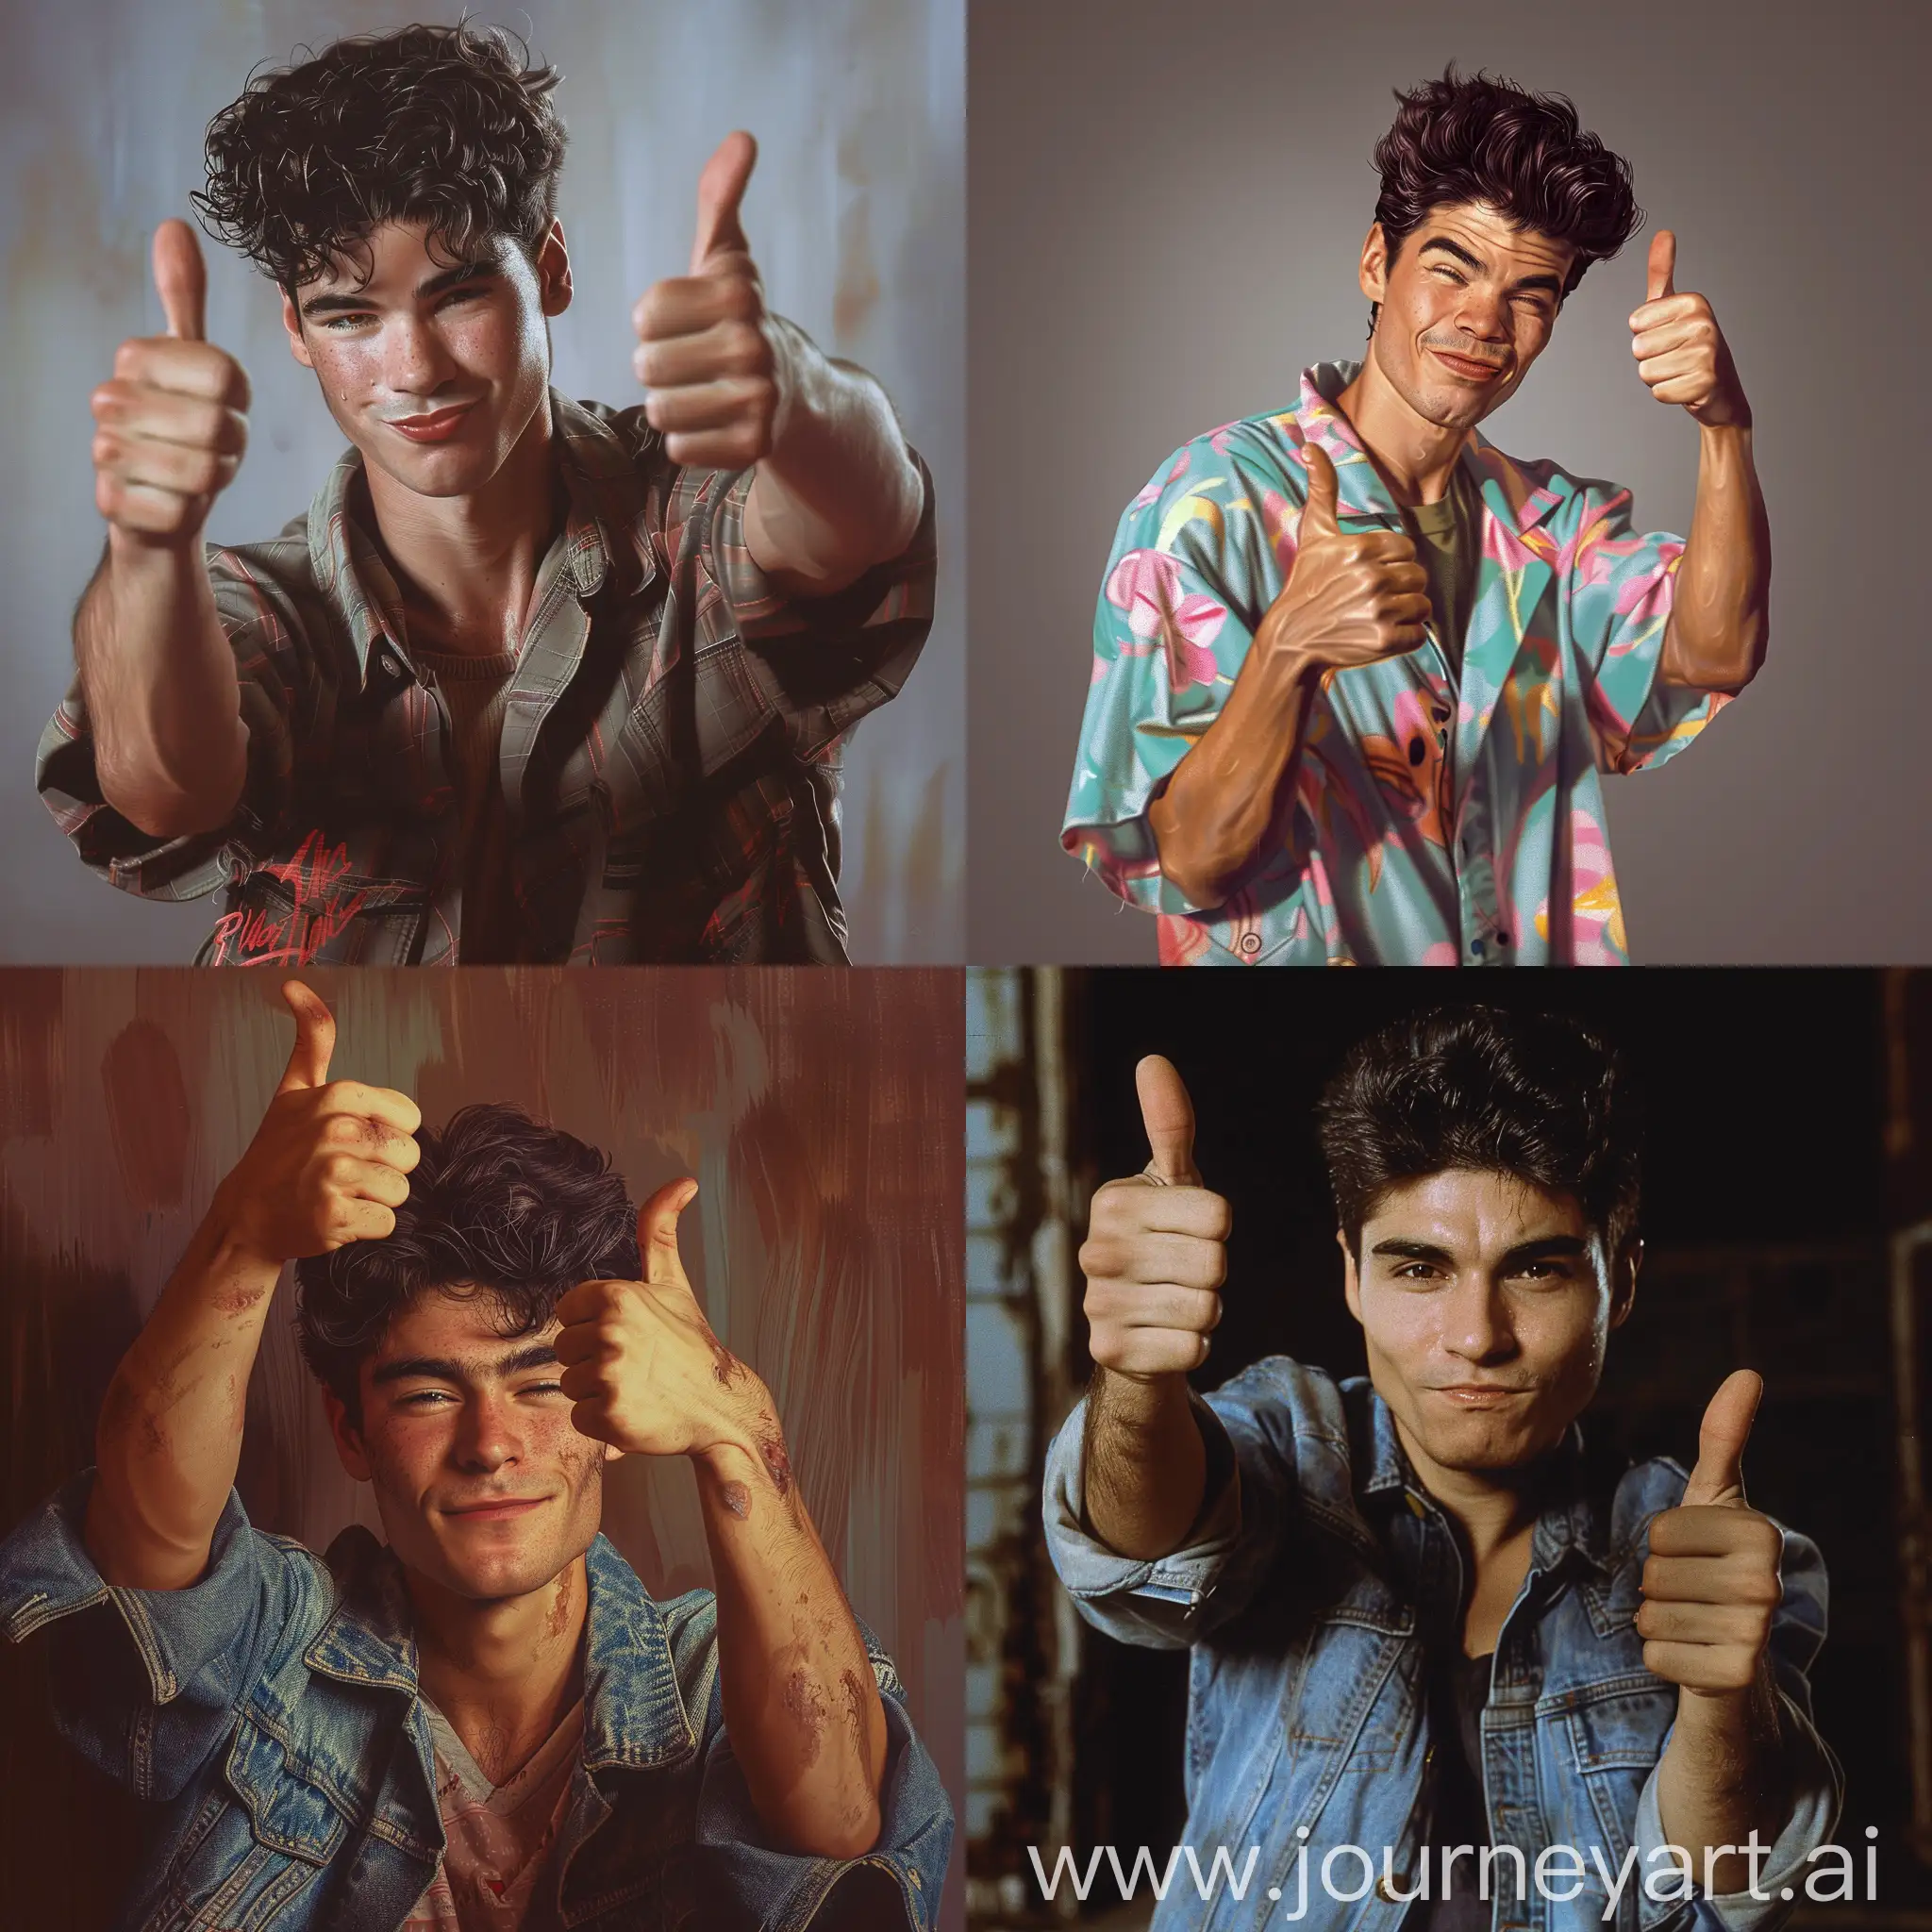 Depict a life-like portrait of Raël from the 80’s giving two thumbs up and doing a wink. Make it look like it was shot on a large format camera with portra 400 film.